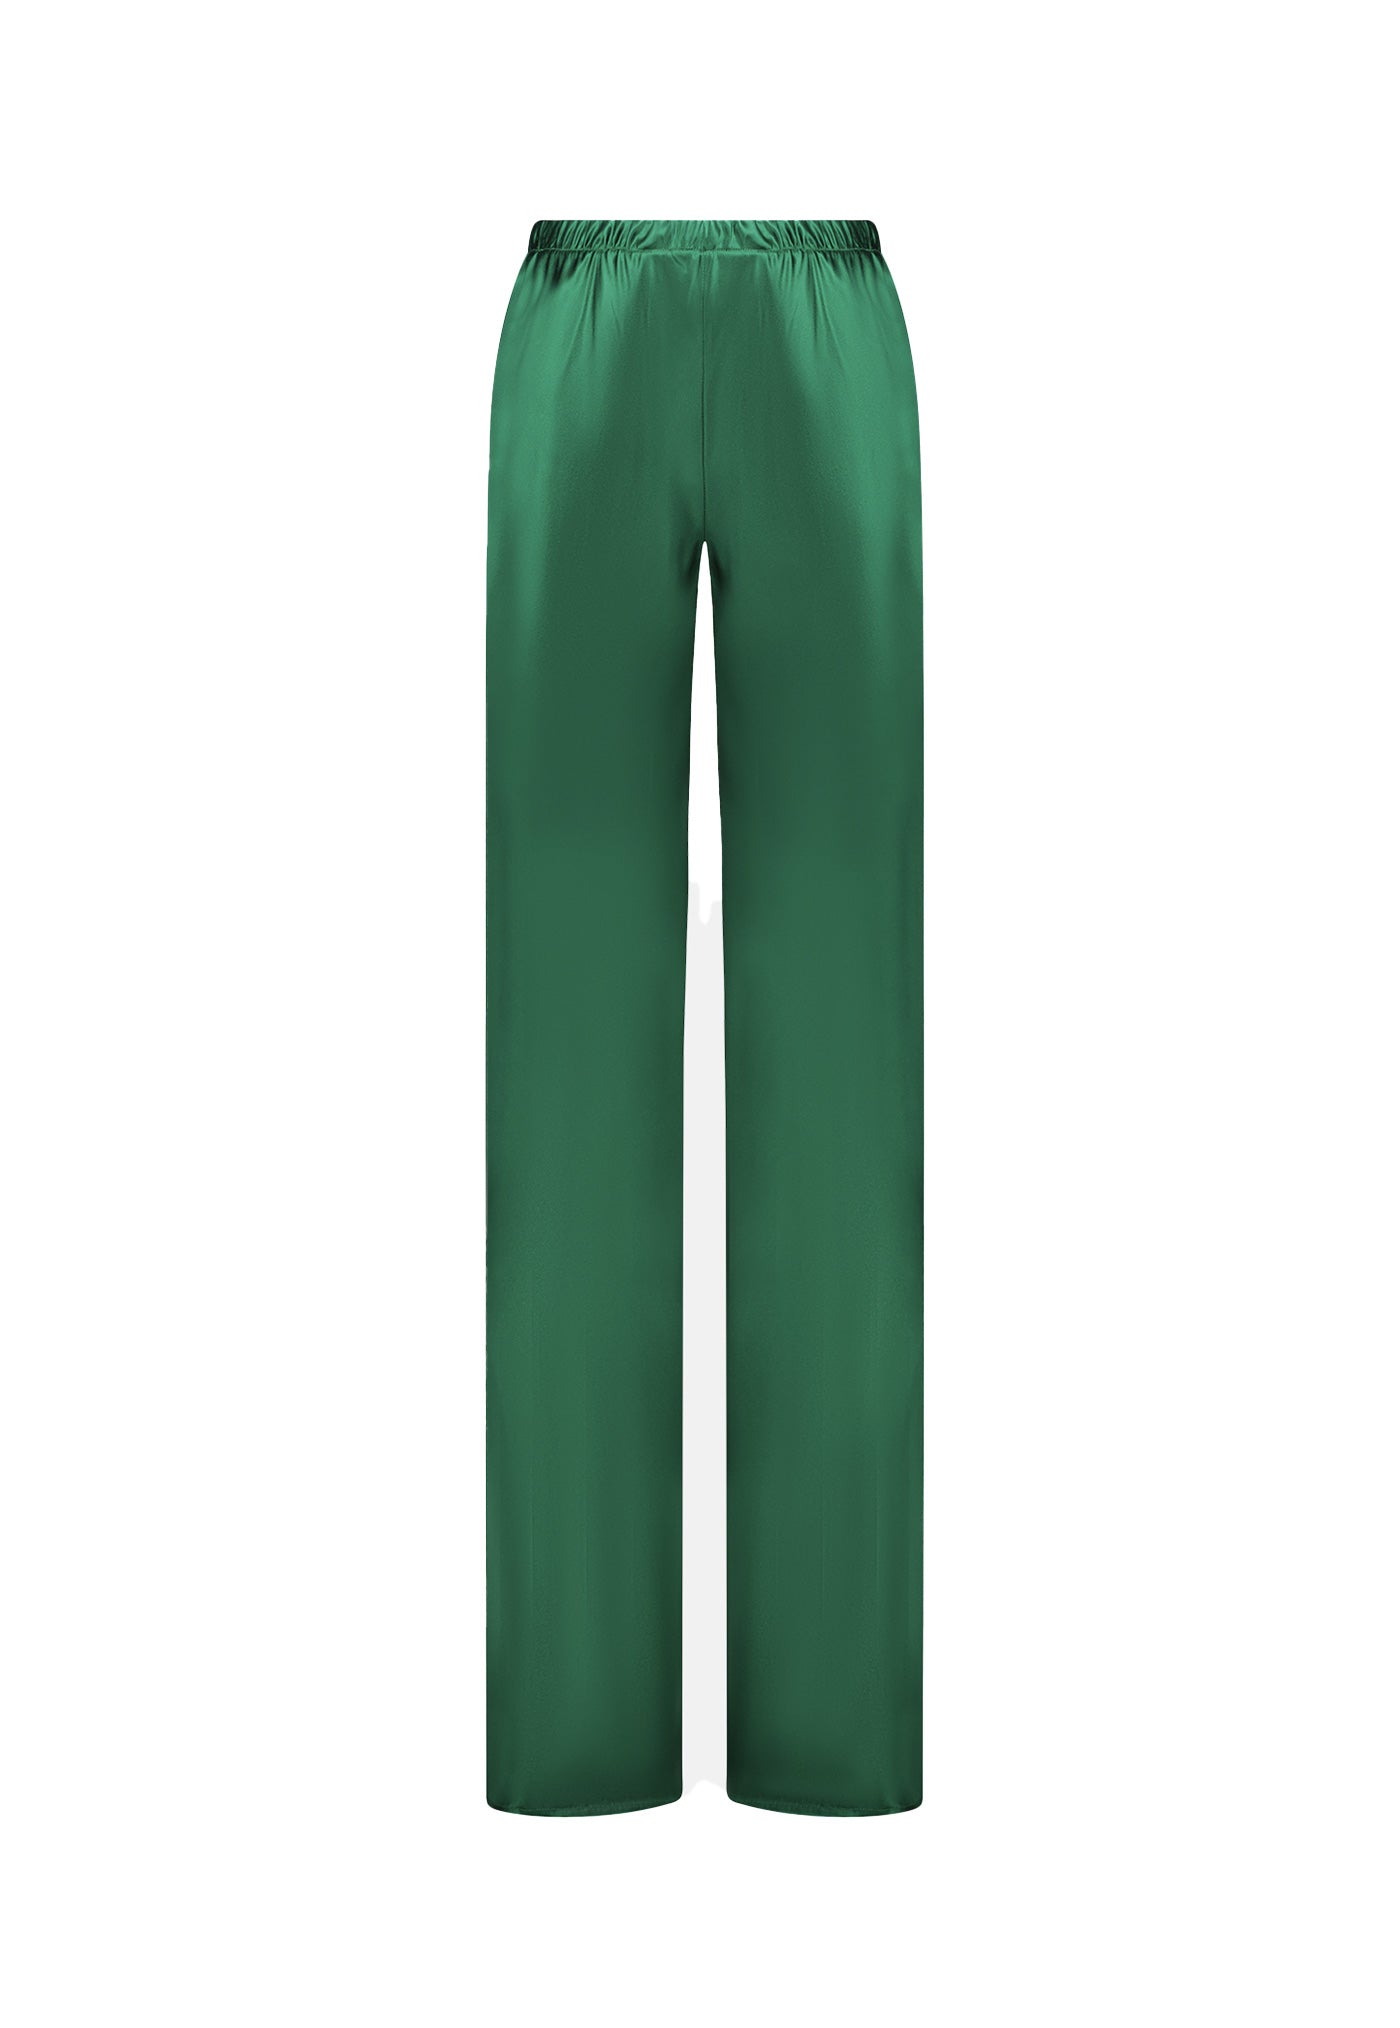 Ophelia Pant - Emerald Green Silk sold by Angel Divine